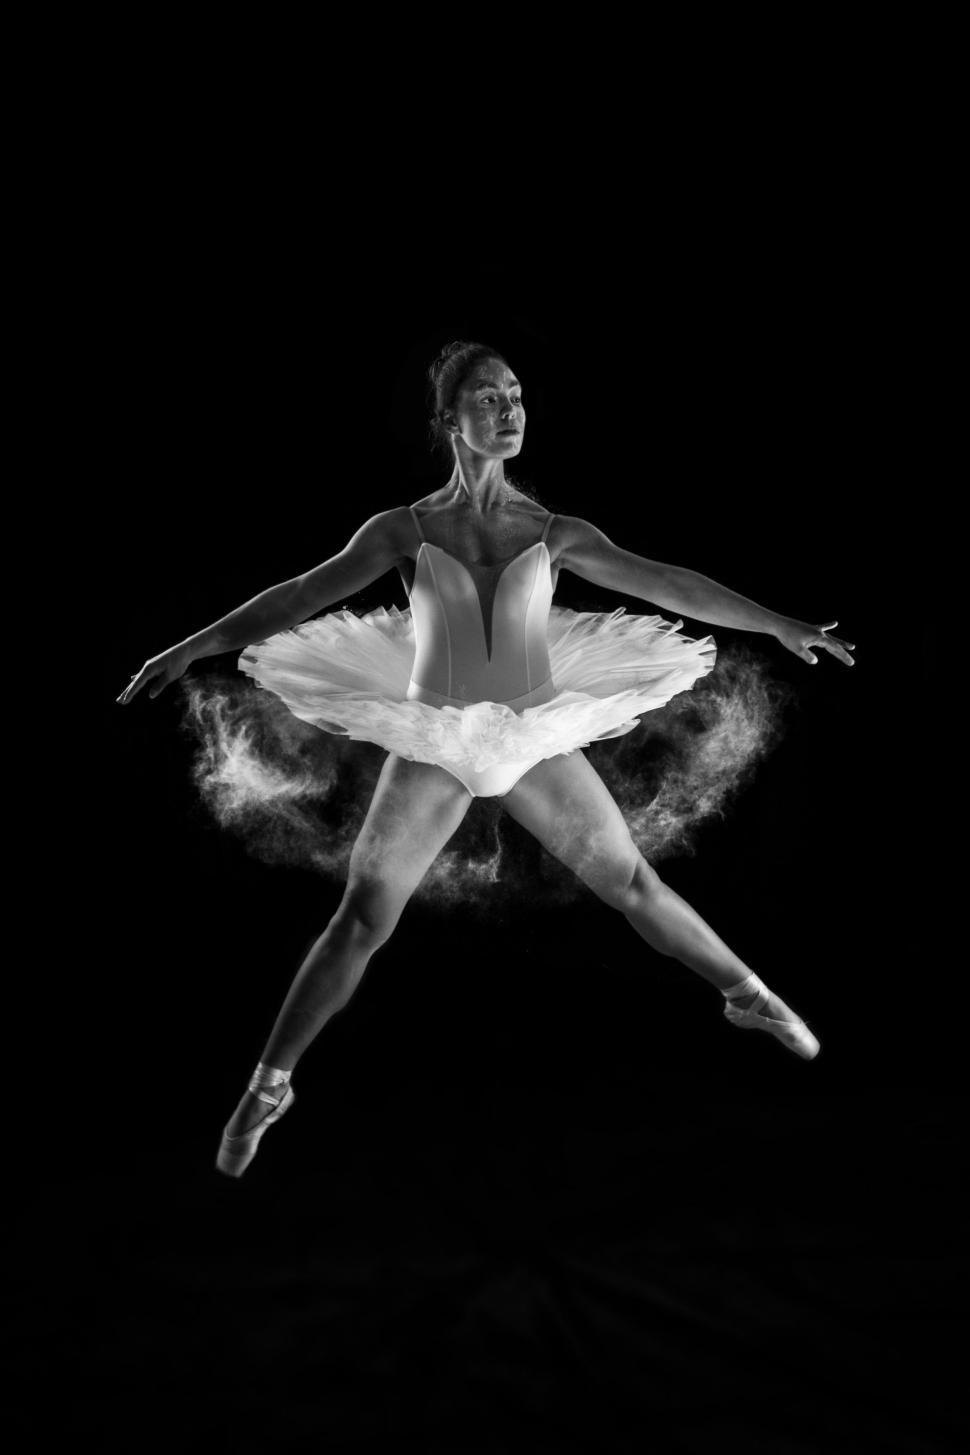 Free Image of Woman in White Dress Performing Ballet Move 